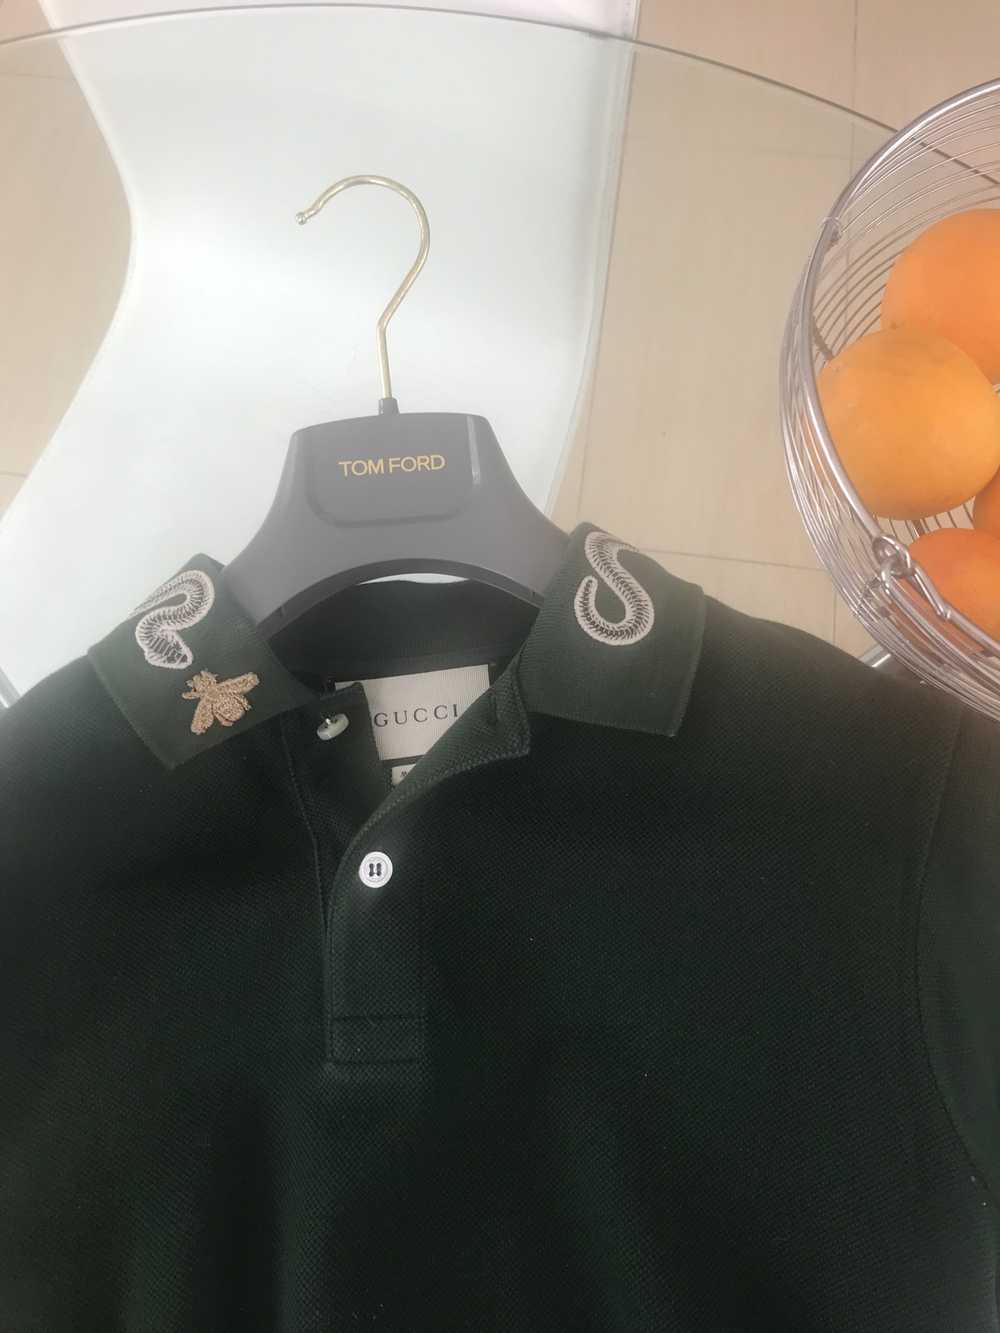 Gucci Black Stretch Cotton Snake Embroidered Collar Polo T-Shirt M Gucci